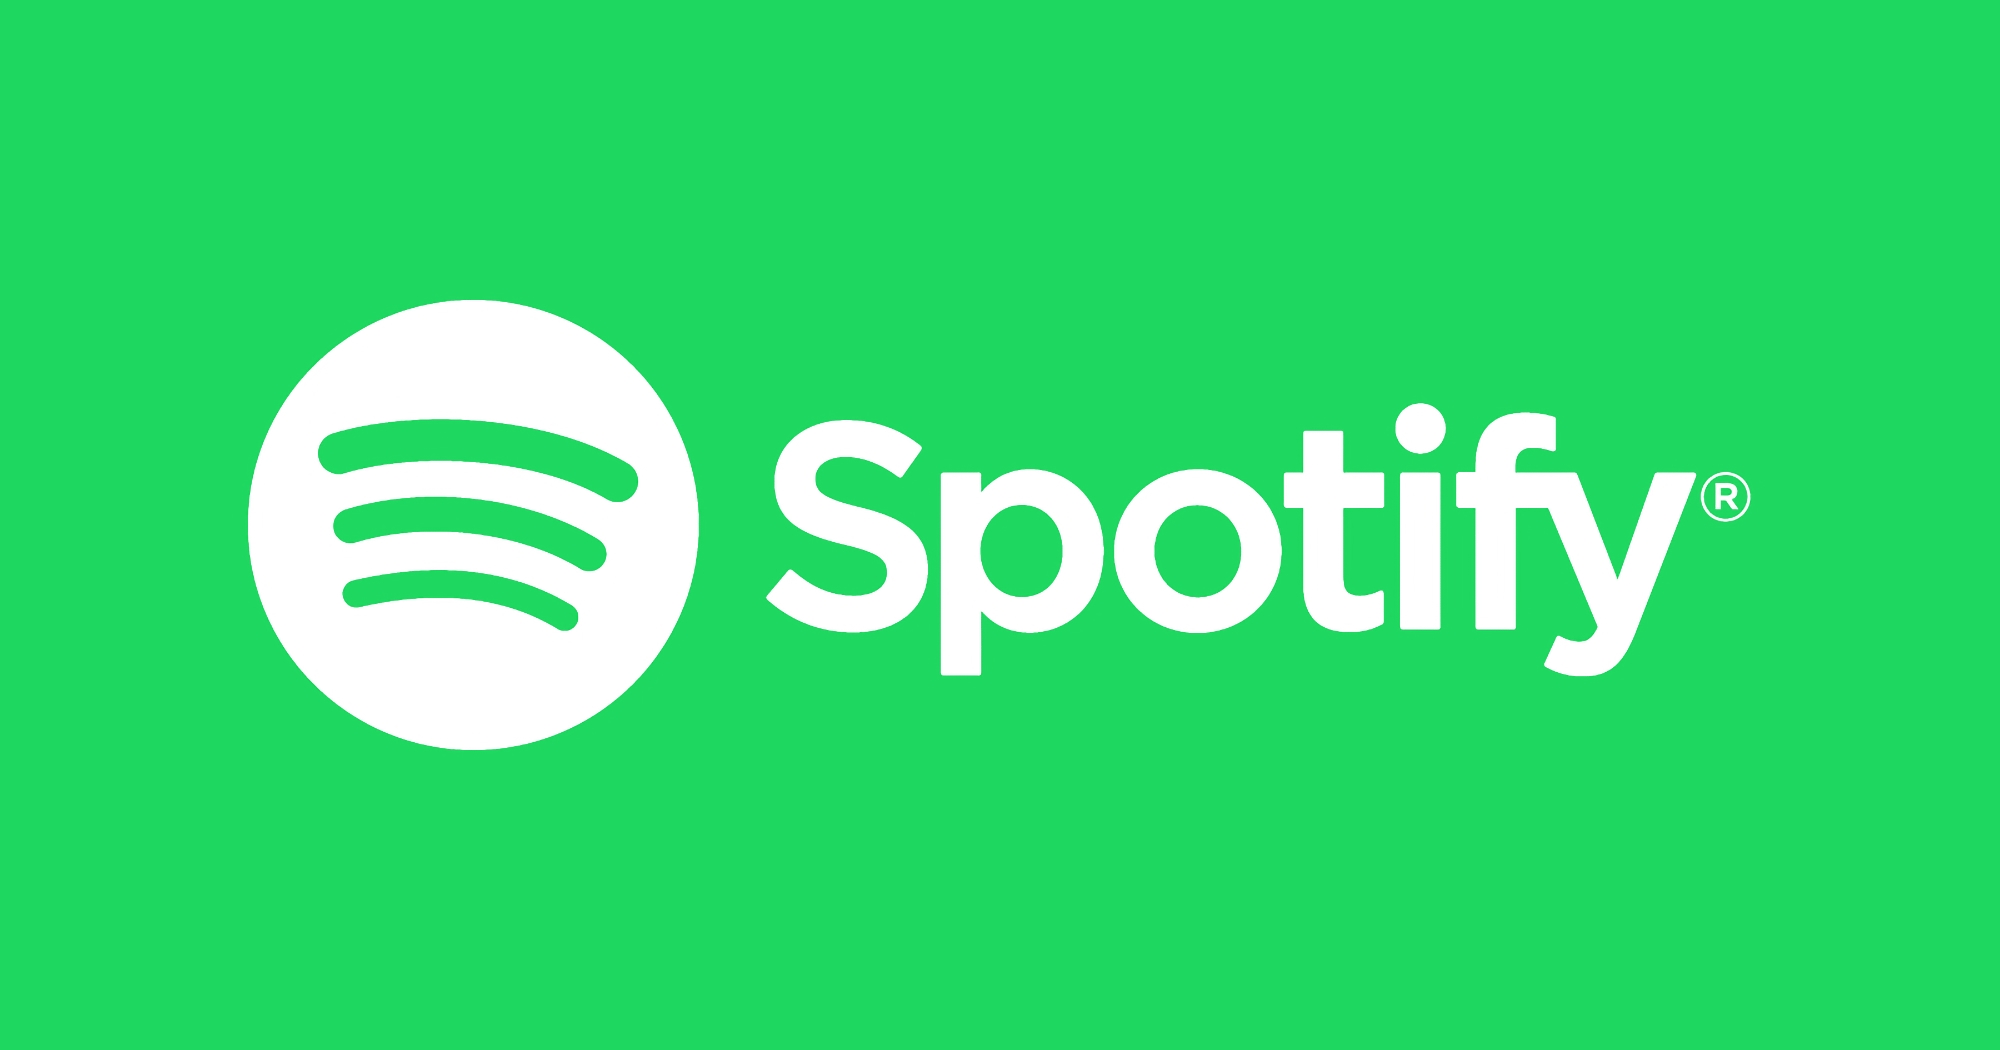 Spotify will get integration with HealthKit: the app will be able to recommend music to fit the user's workout